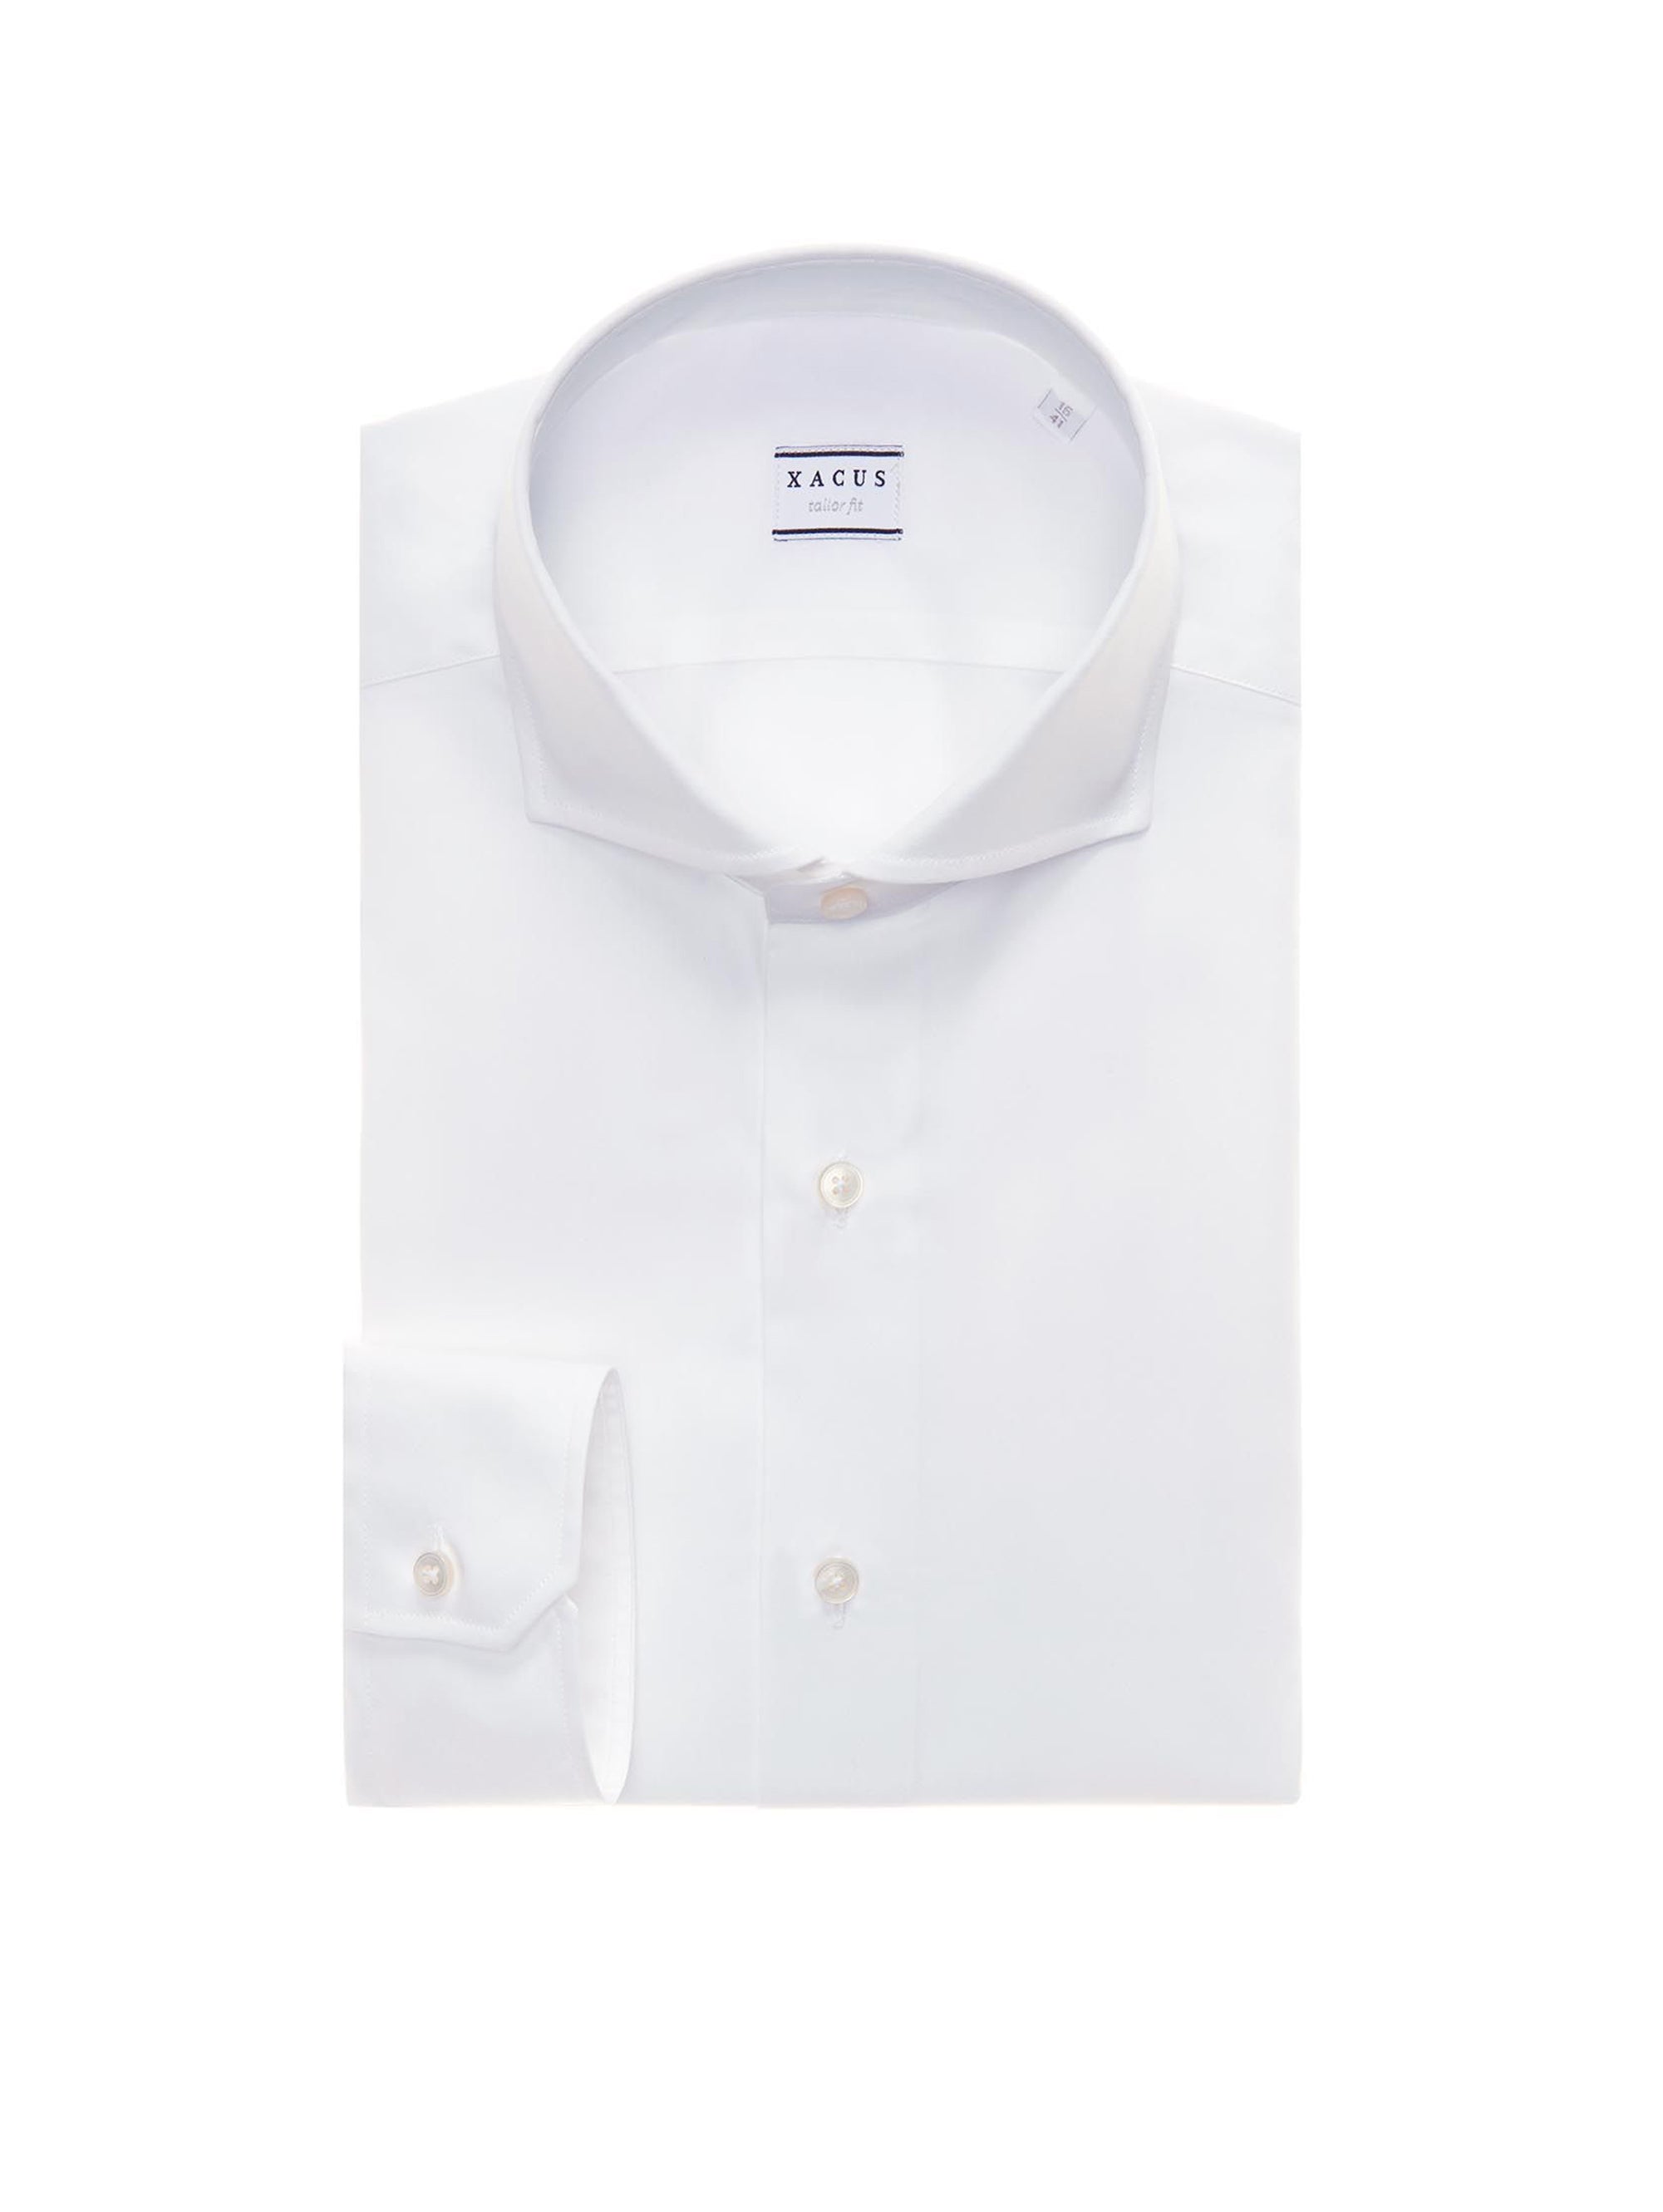 XACUS-Camicia in Popeline Bianco-TRYME Shop